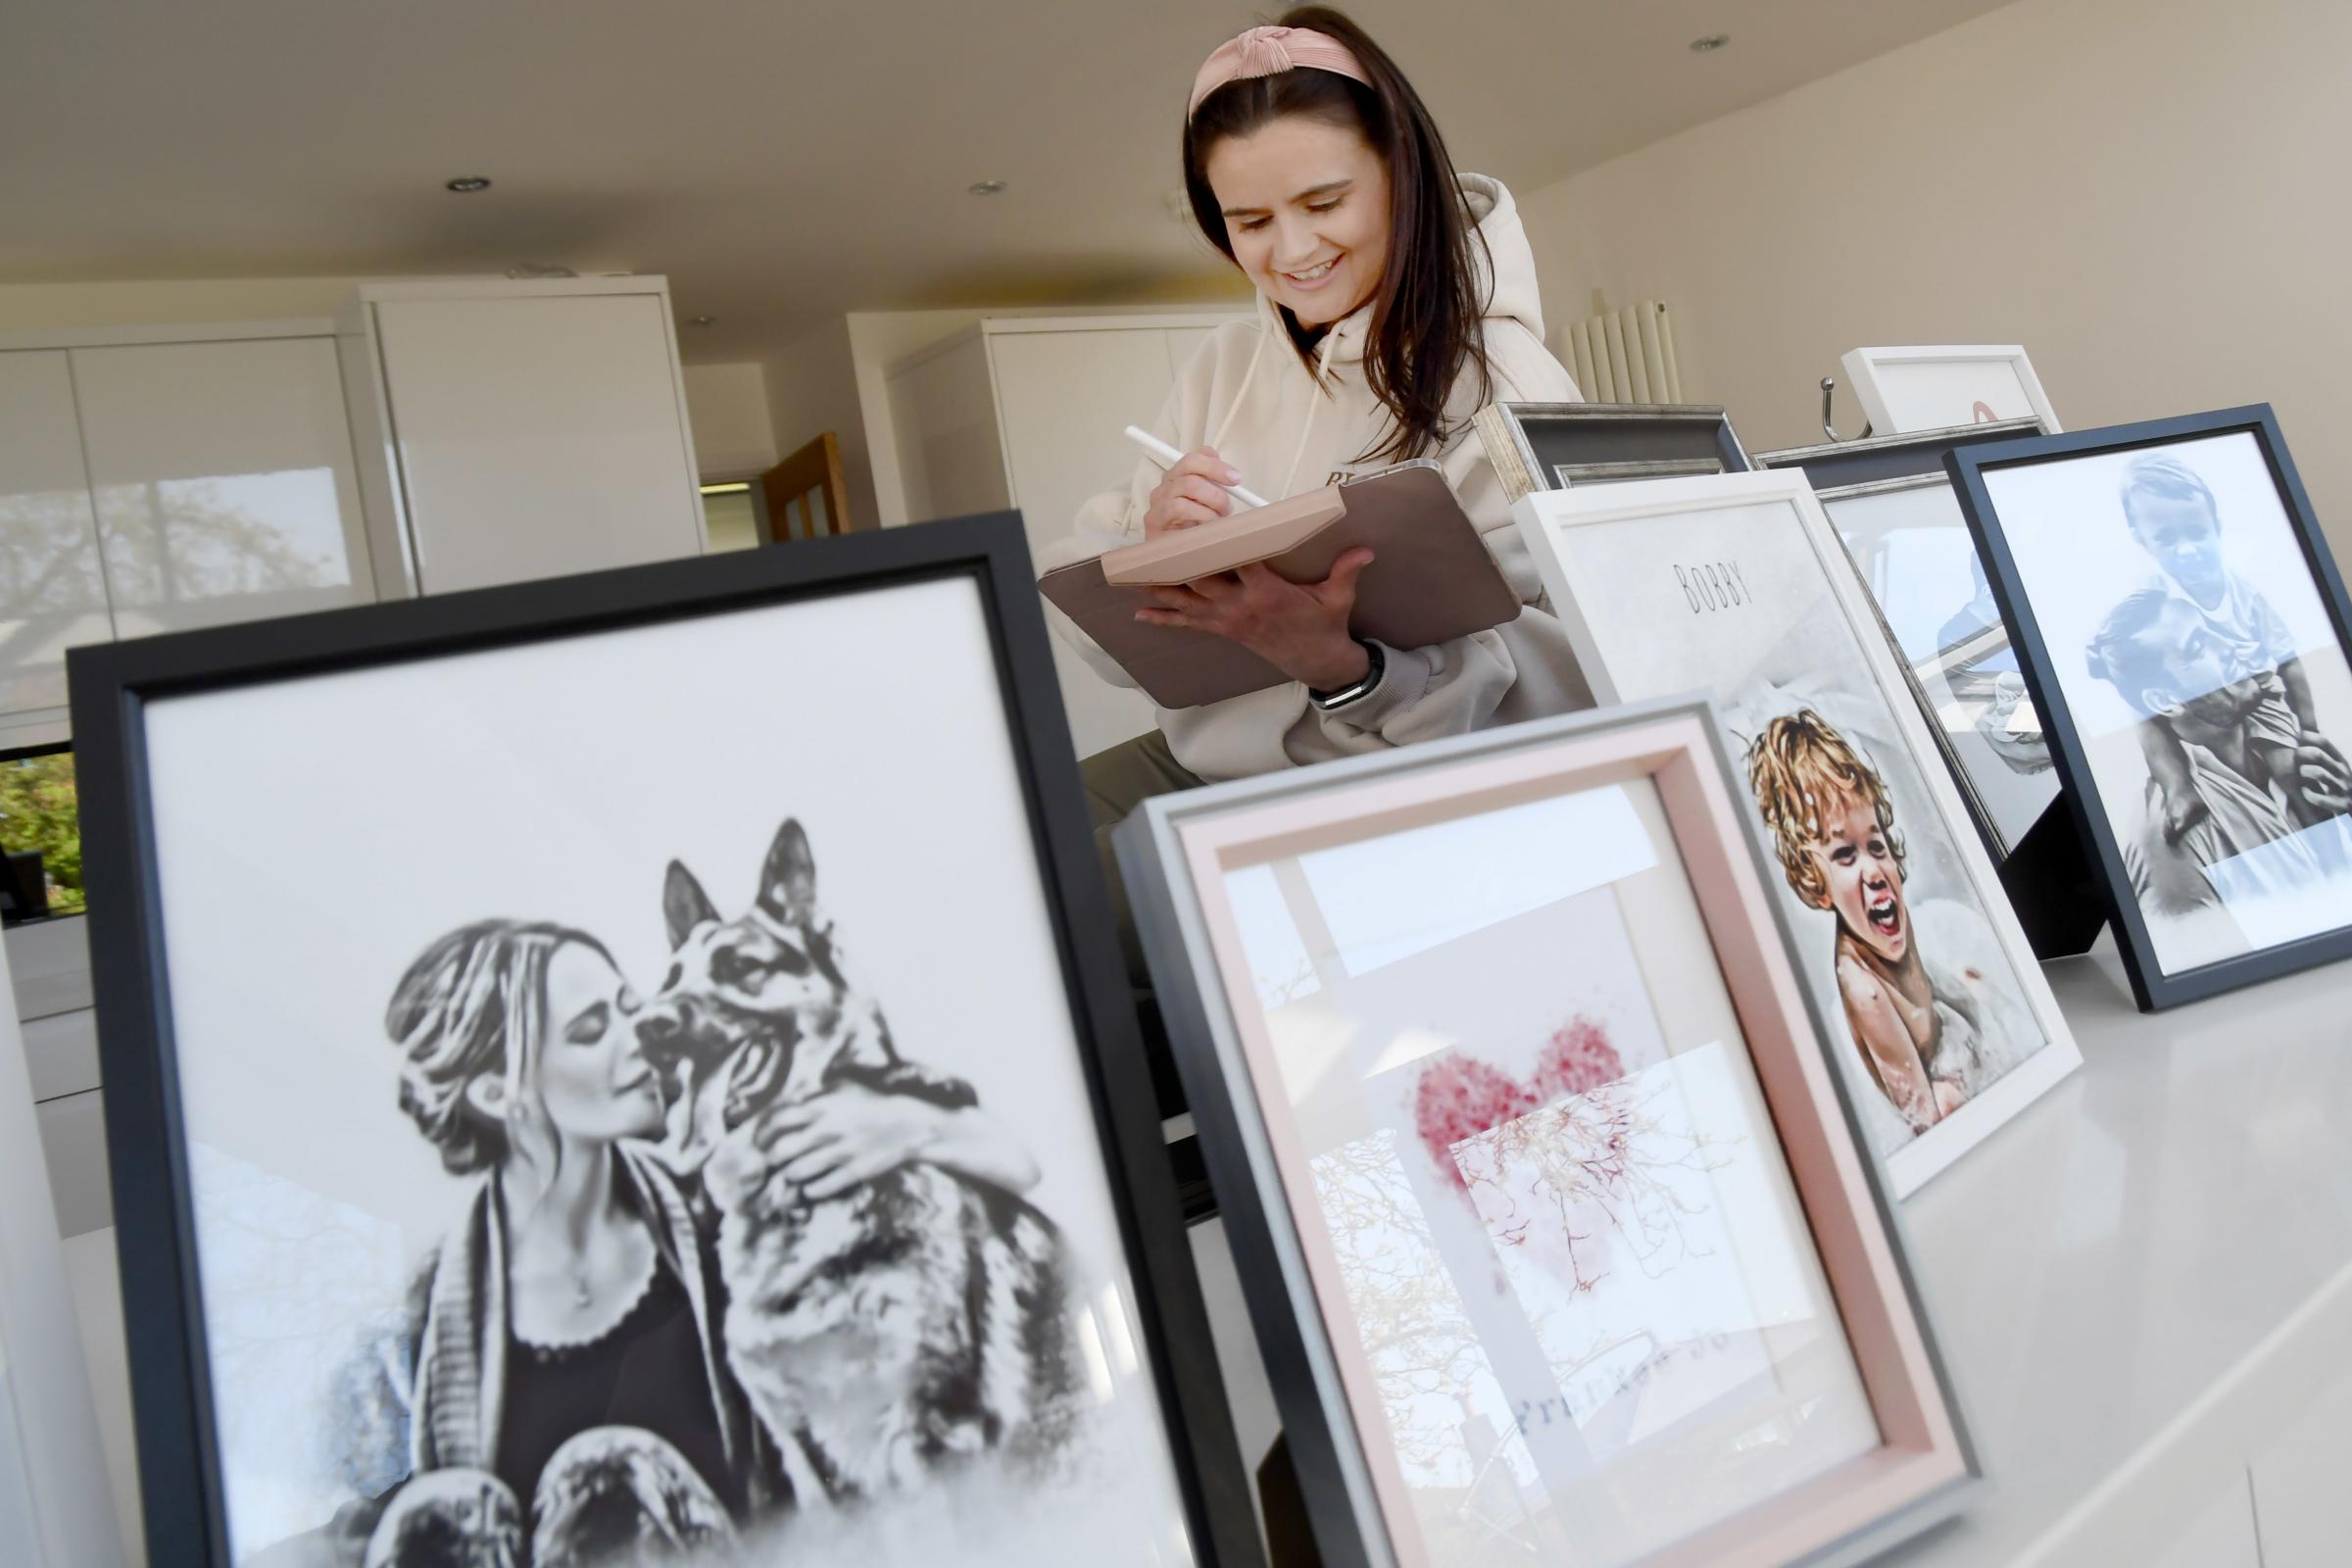 Becky Dutton-Geraghty has launched a very successful portrait business thanks to Covid